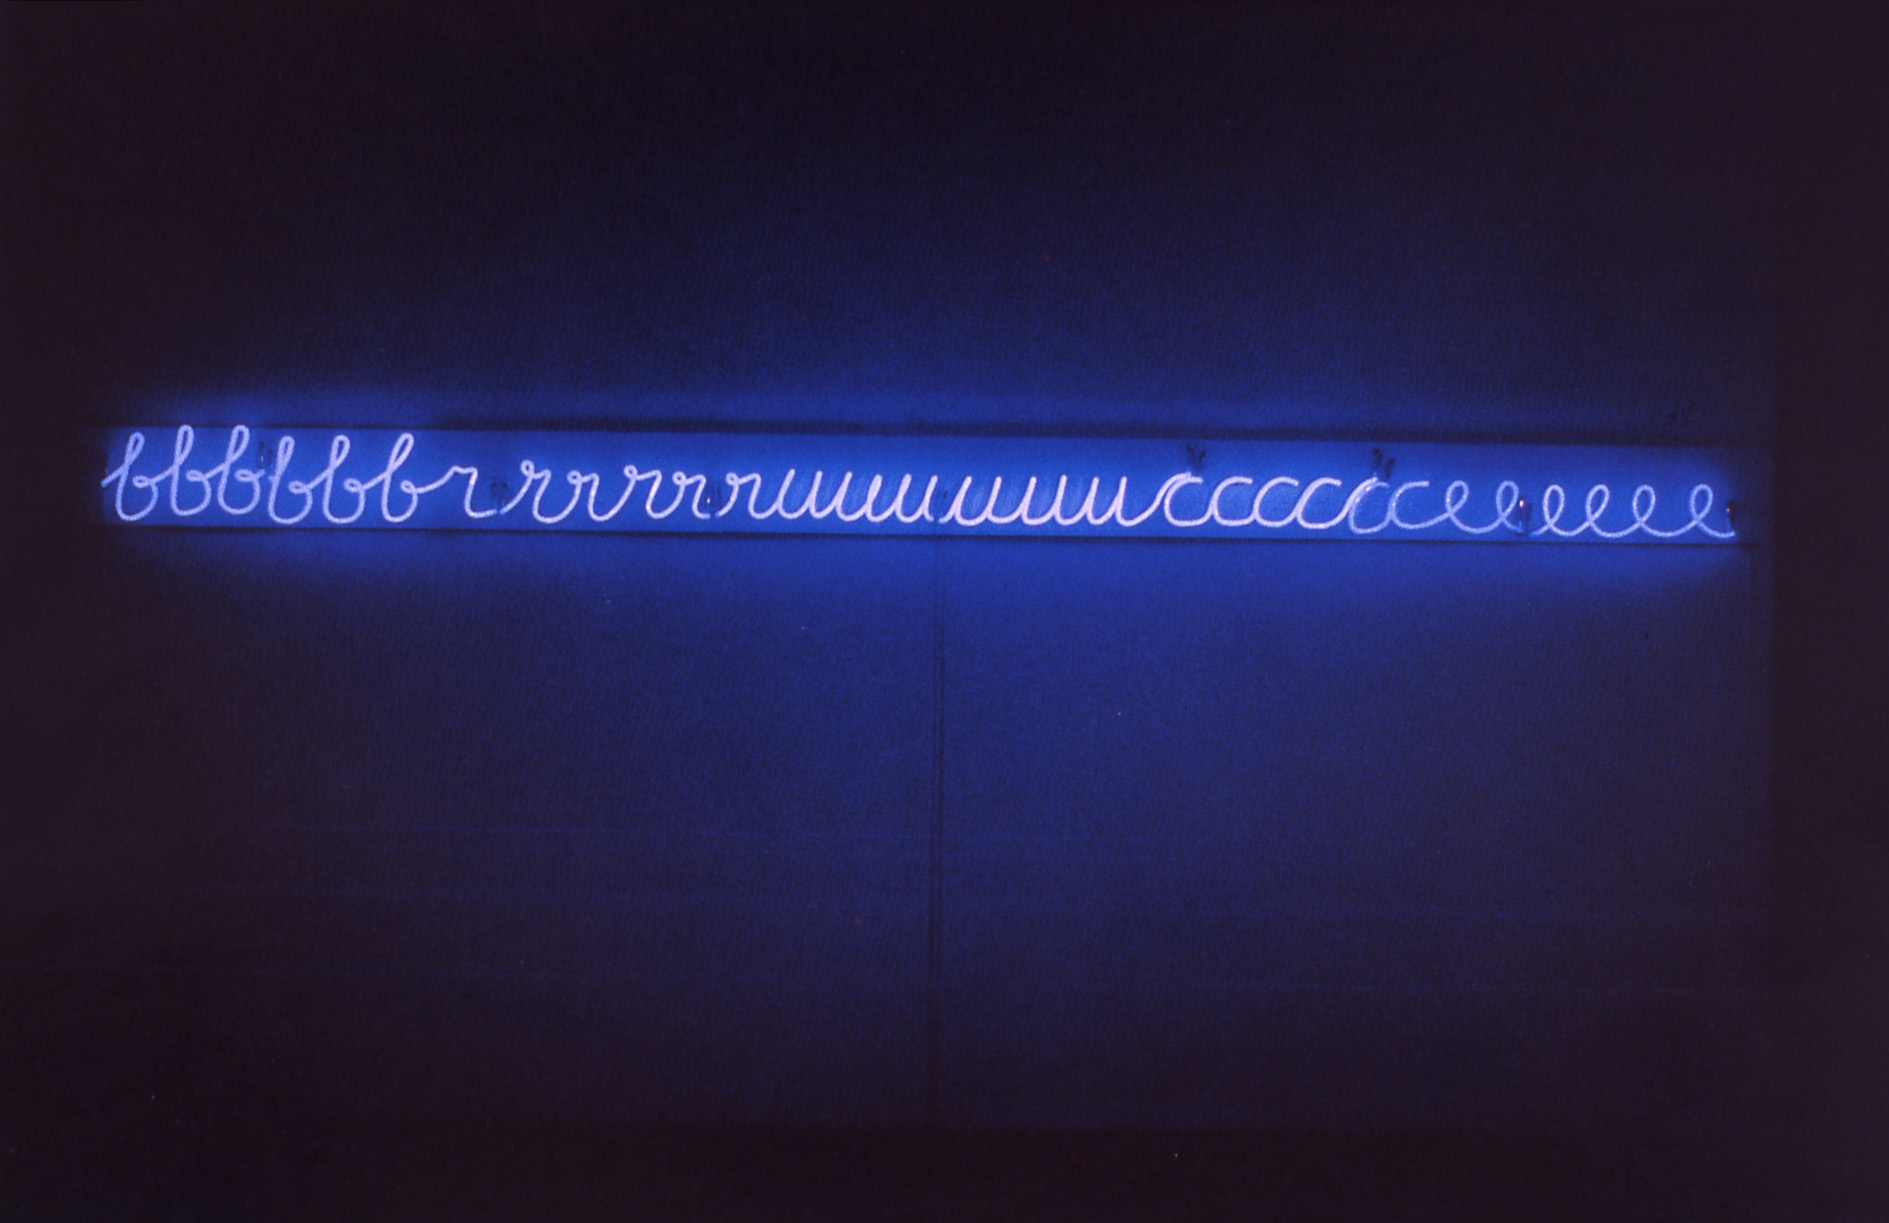 Image result for bruce nauman My Name As Though It Were Written on the Surface of Moon images